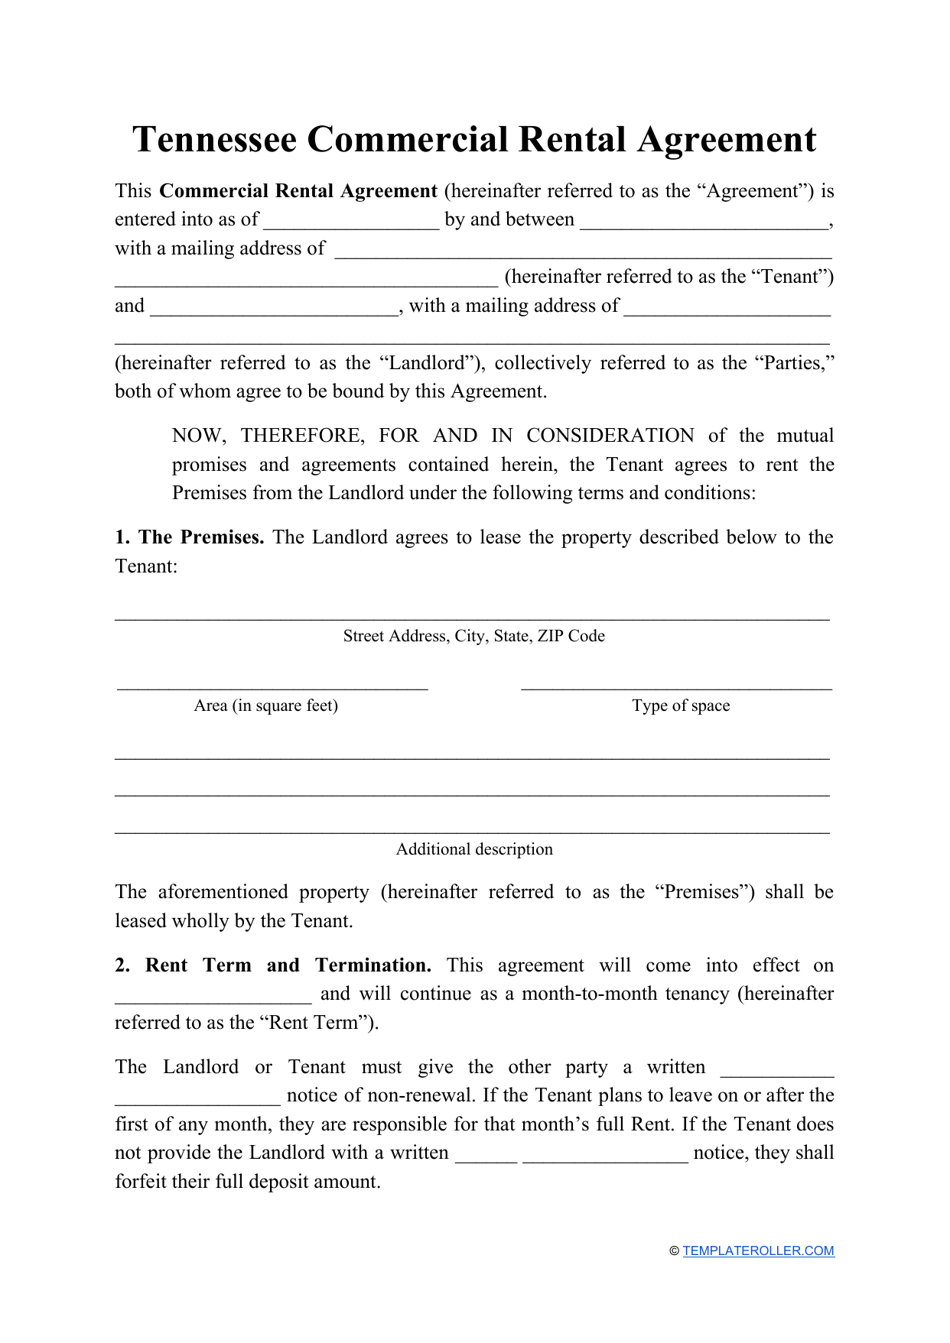 Tennessee Commercial Rental Agreement Template Download Printable PDF